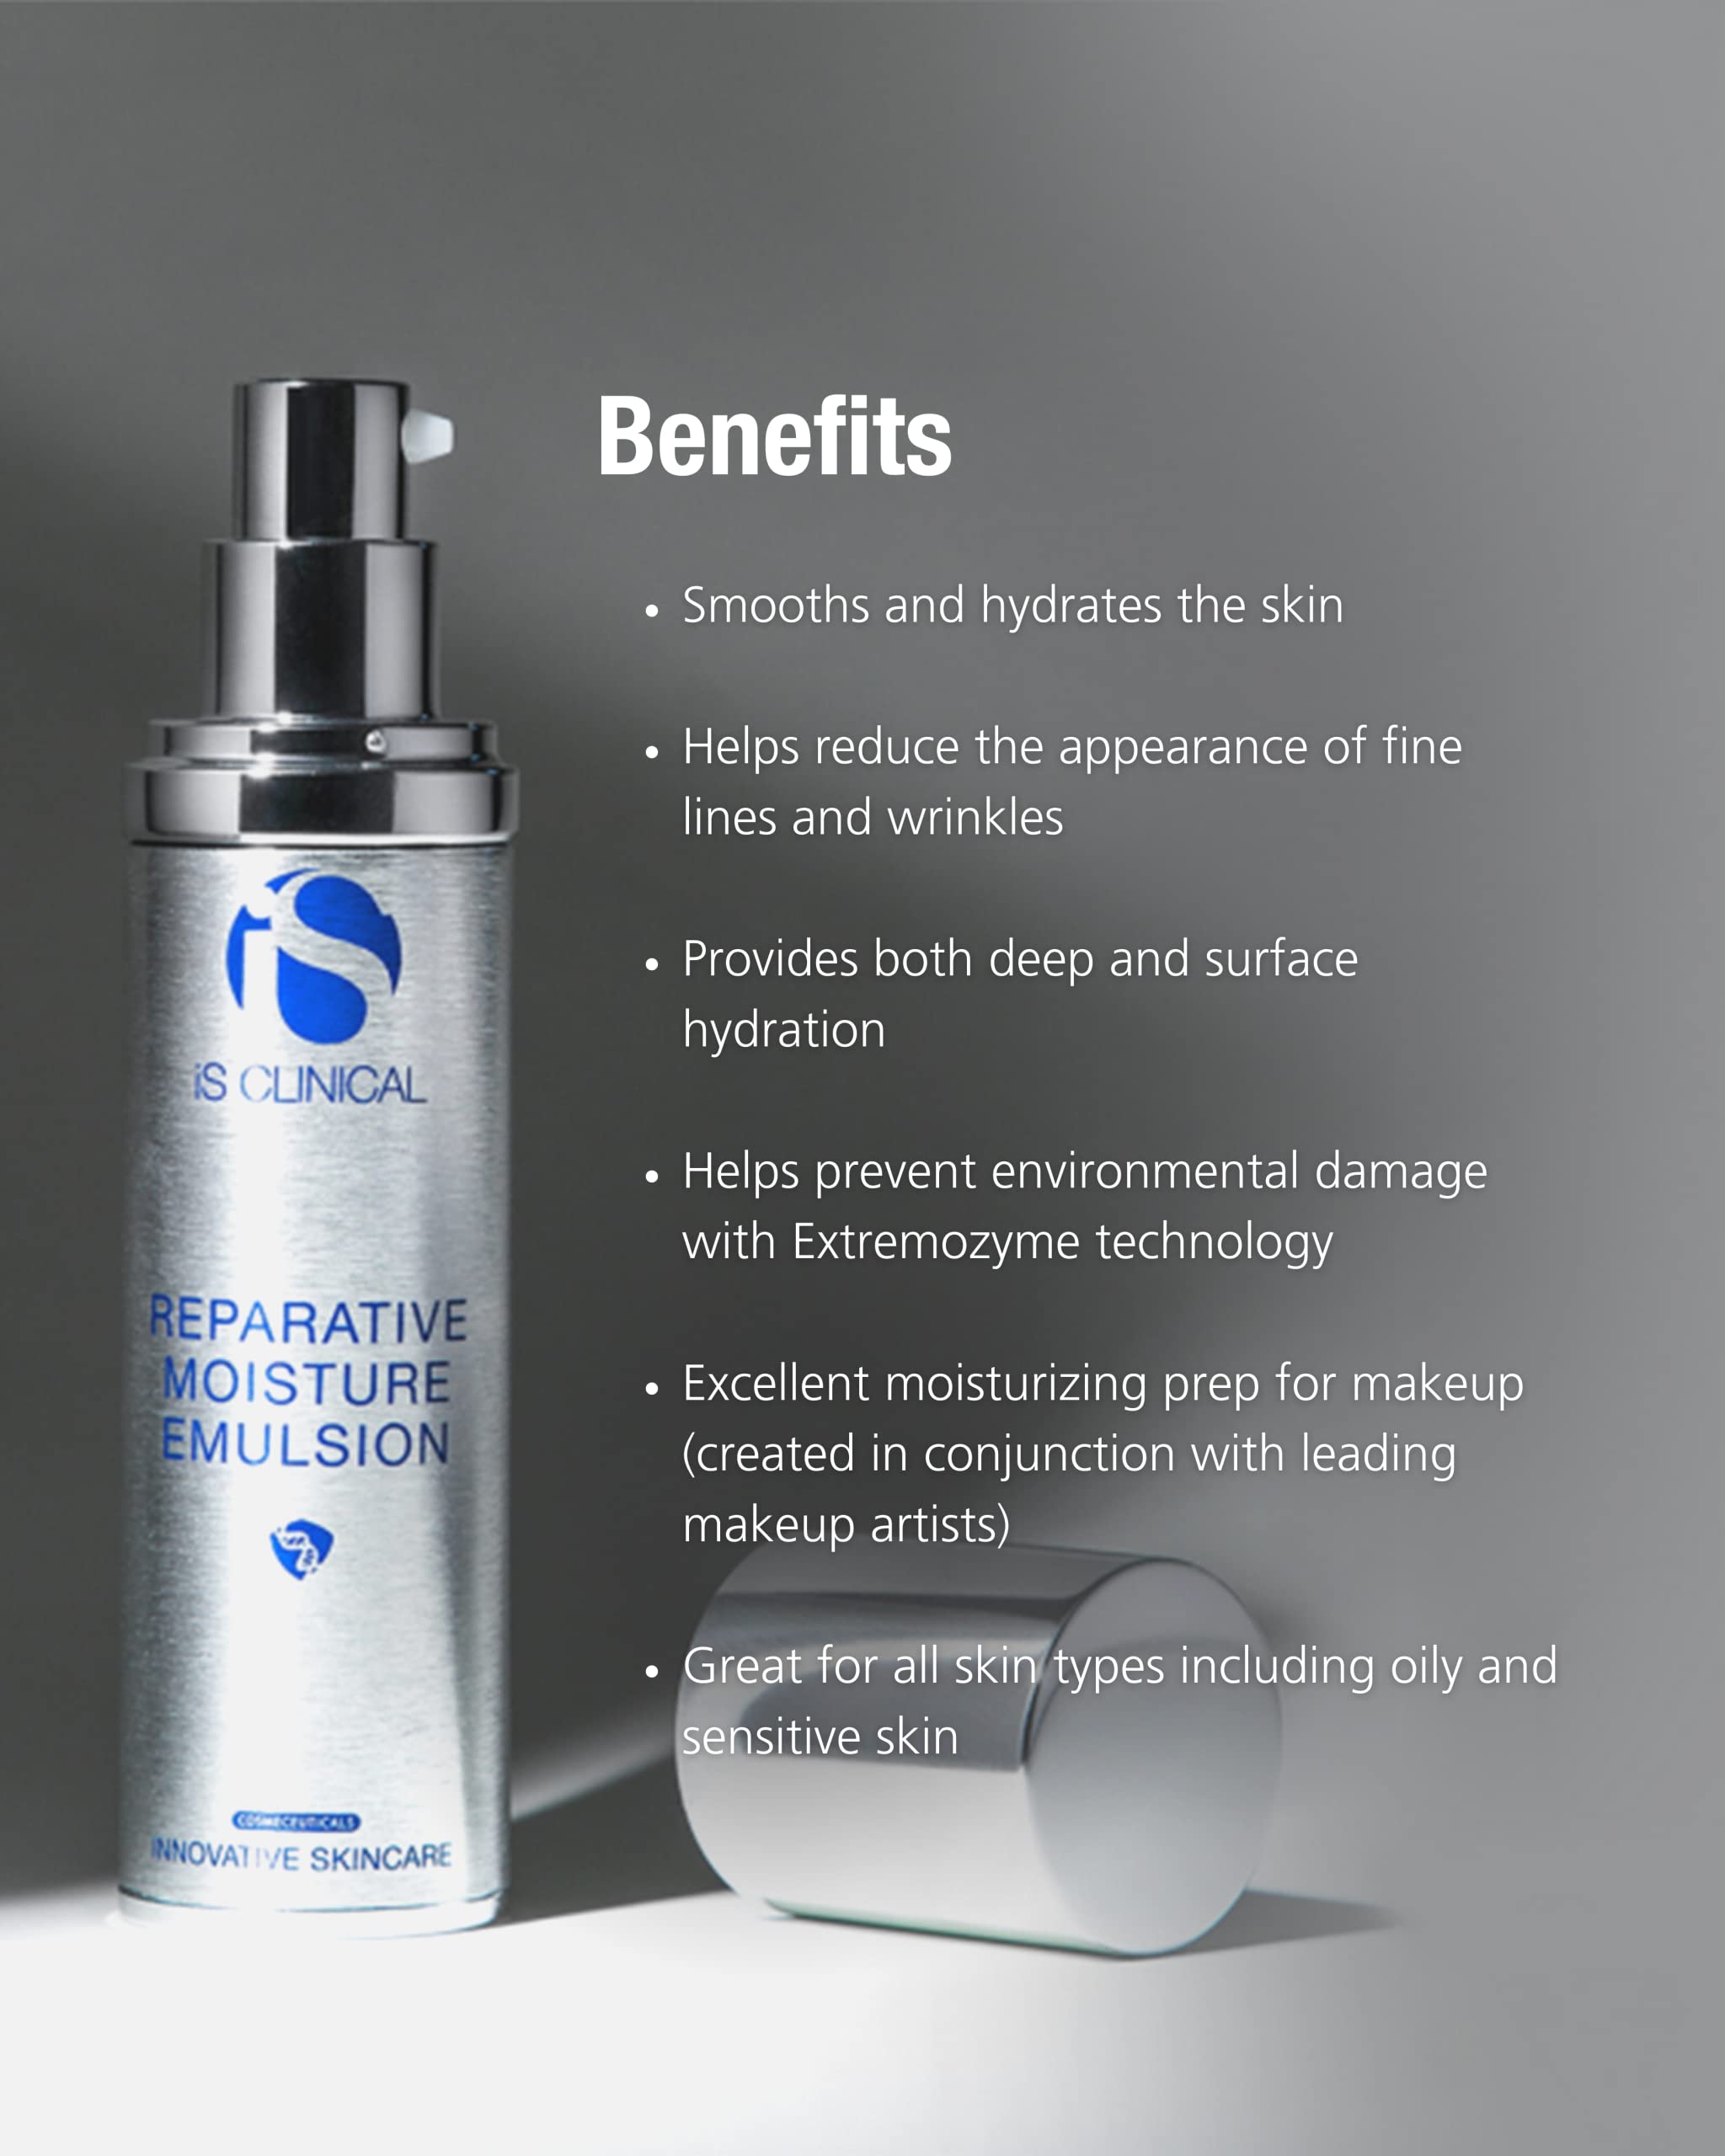 iS CLINICAL Reparative Moisture Emulsion, Hydrating Anti-Aging Face Moisturizer with Hyaluronic Acid, Repairs and Protects Skin